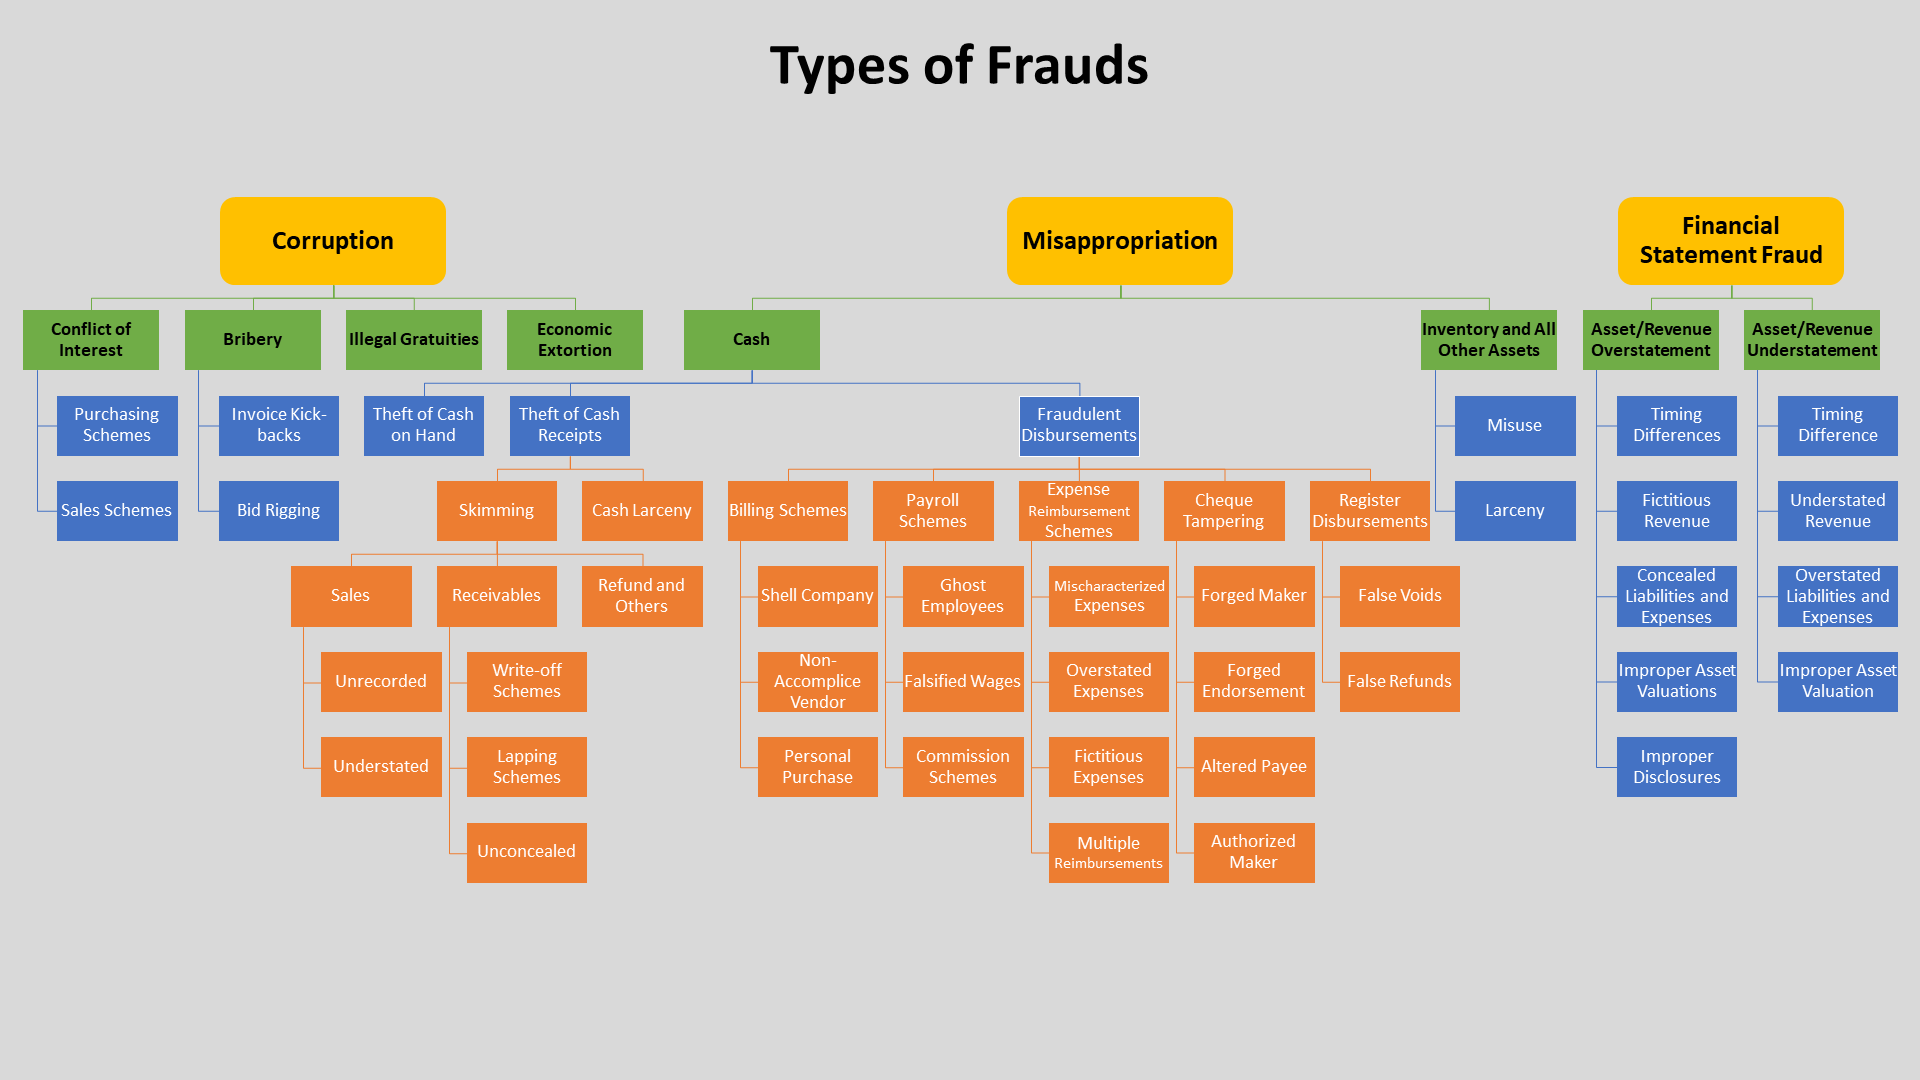 What are the common types of corporate frauds?